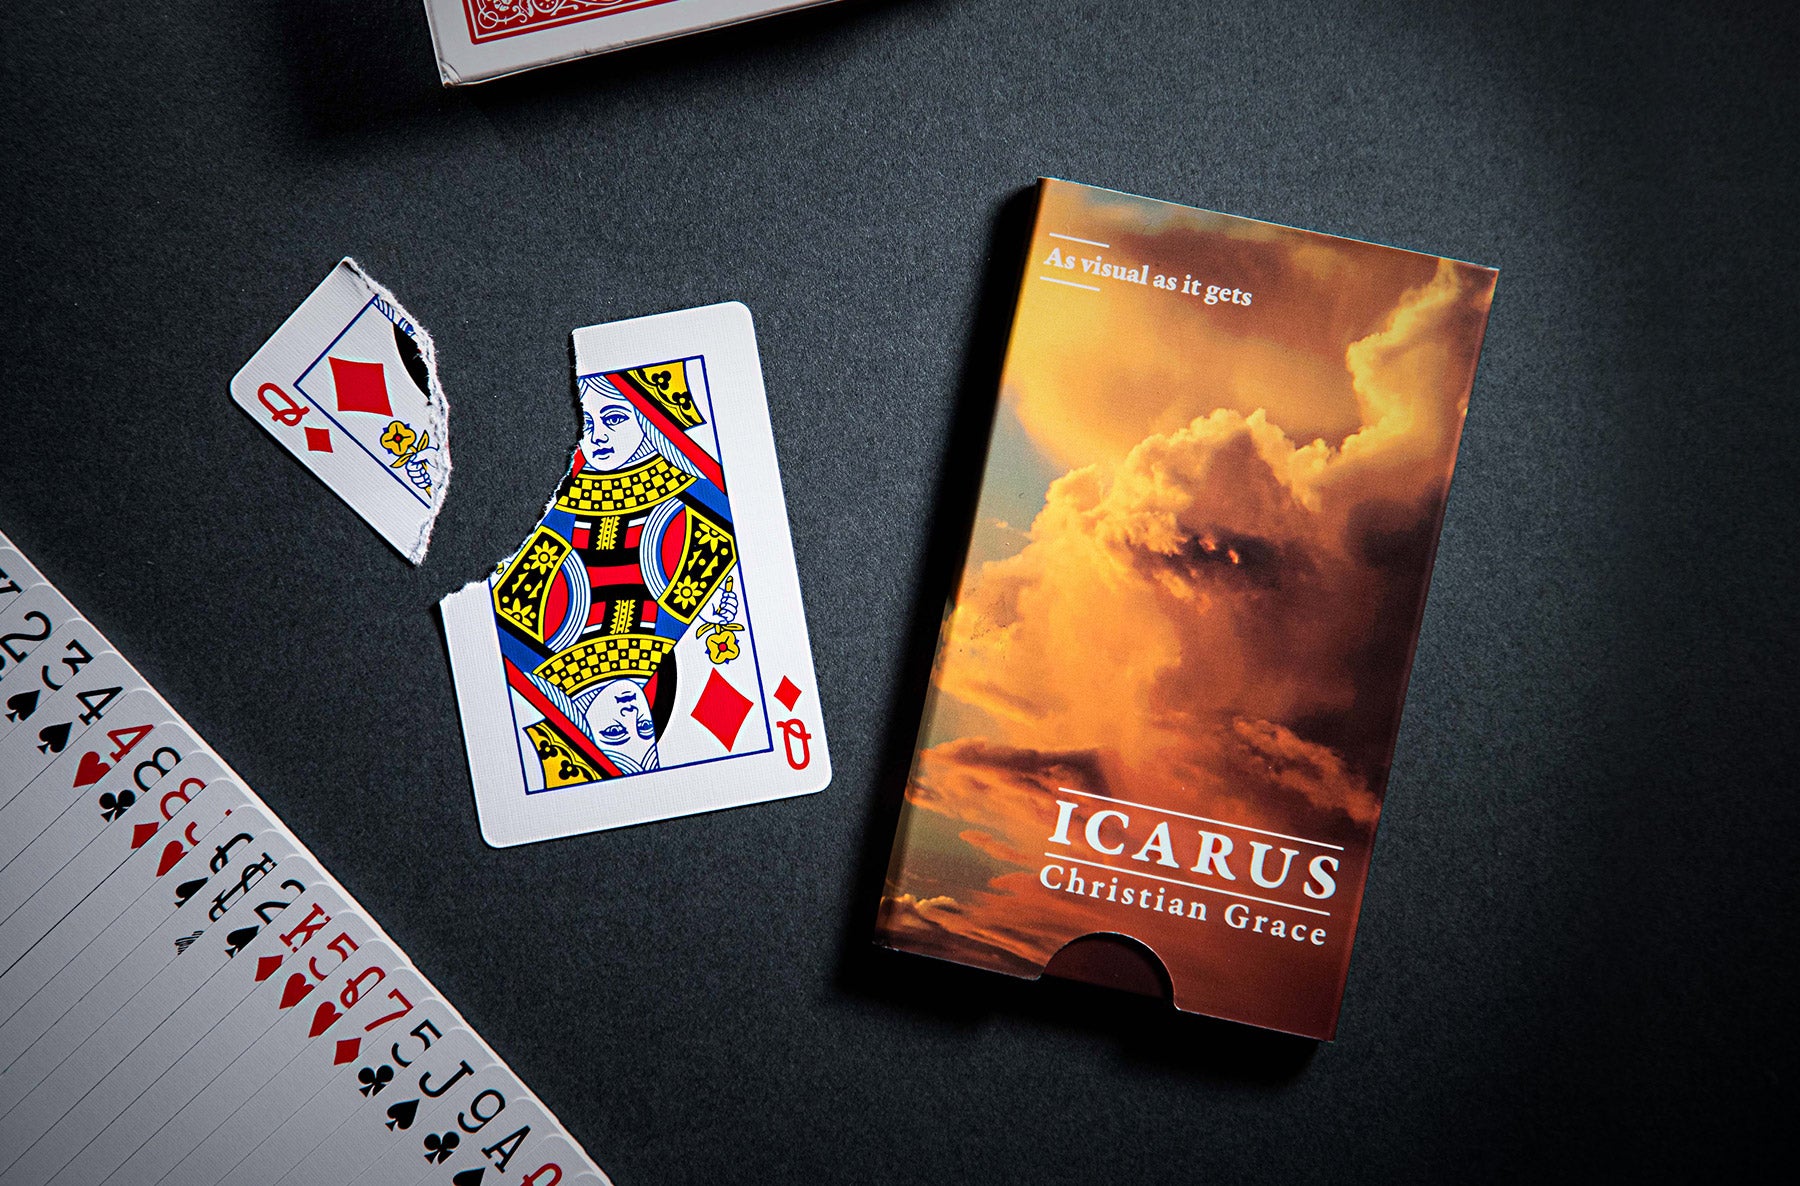 Icarus by Christian Grace | Ellusionist